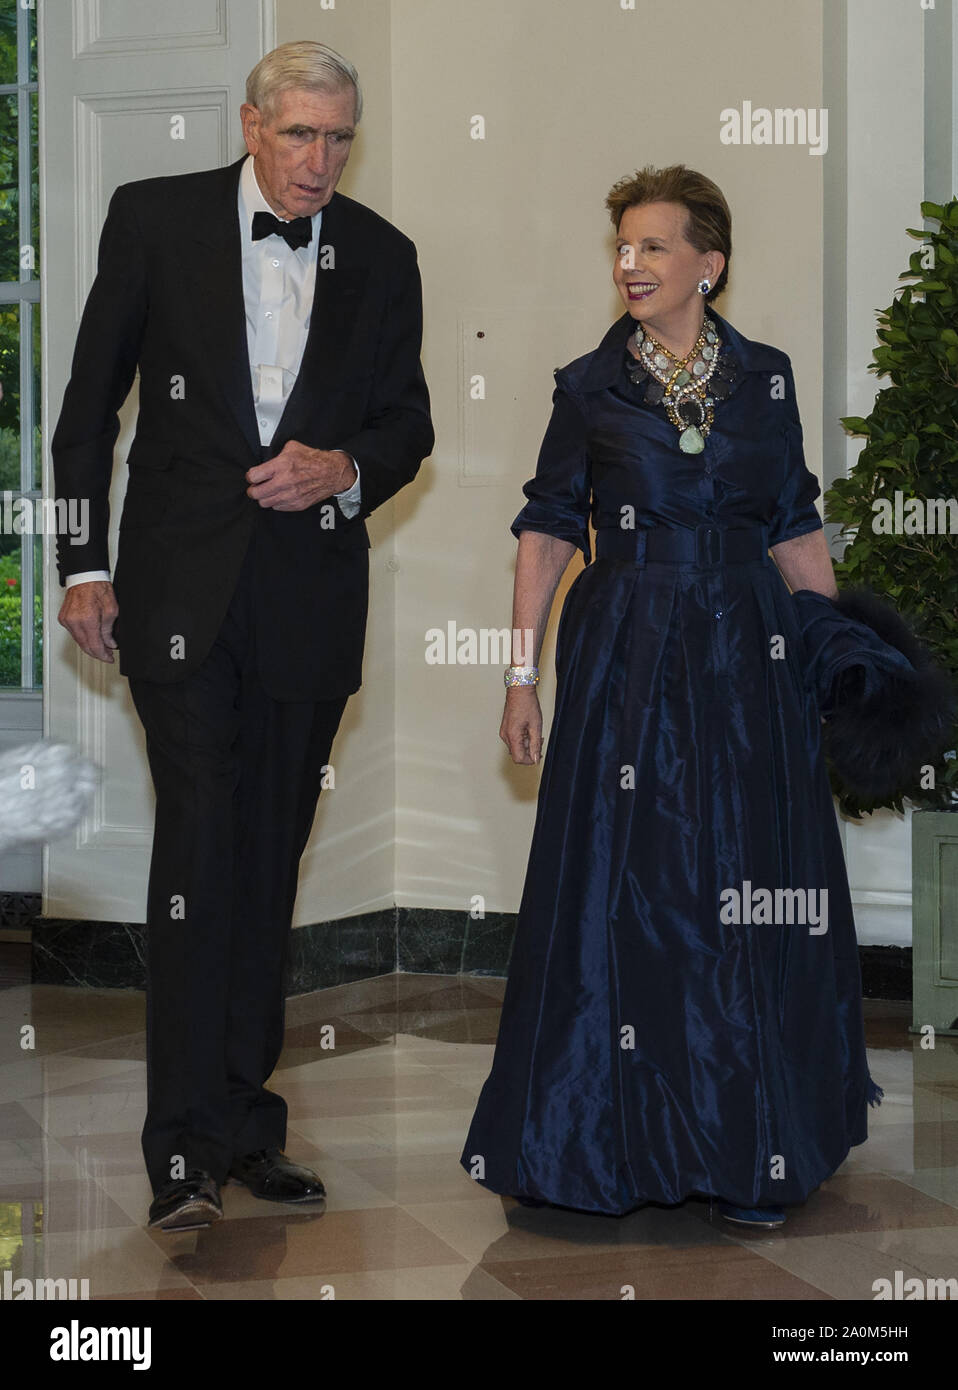 Washington, District of Columbia, USA. 20th Sep, 2019. Adrienne Arsht and C. Boyden Gray arrive for the State Dinner hosted by United States President Donald J. Trump and First lady Melania Trump in honor of Prime Minister Scott Morrison of Australia and his wife, Jenny Morrison, at the White House in Washington, DC on Friday, September 20, 2019 Credit: Ron Sachs/CNP/ZUMA Wire/Alamy Live News Stock Photo